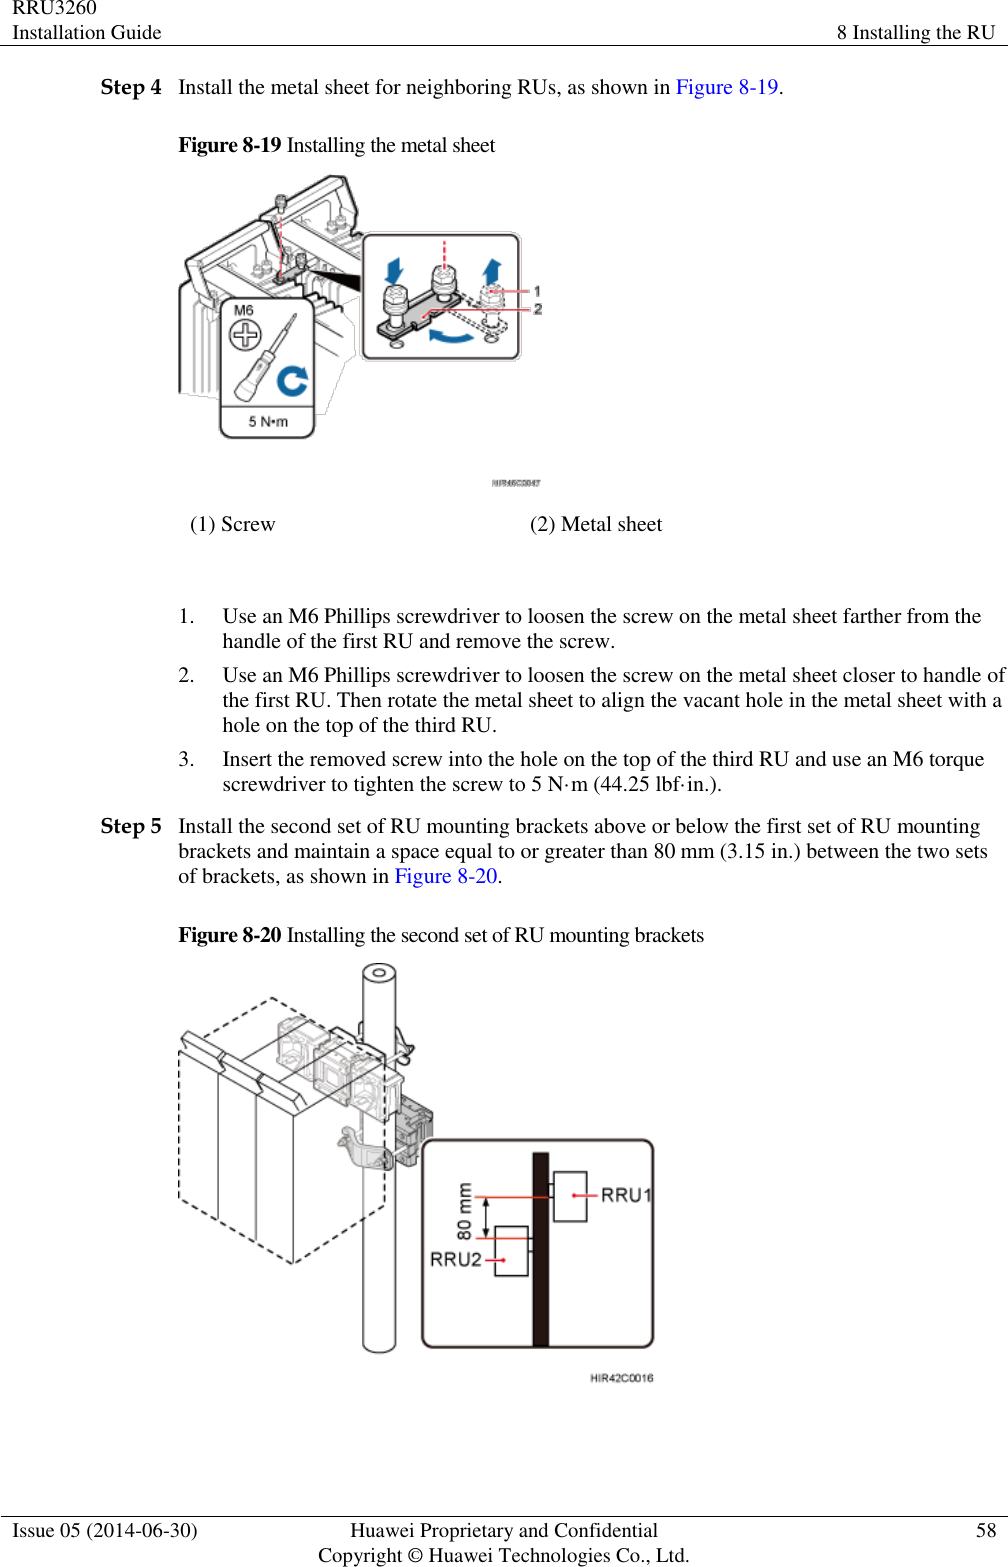 RRU3260 Installation Guide 8 Installing the RU  Issue 05 (2014-06-30) Huawei Proprietary and Confidential                                     Copyright © Huawei Technologies Co., Ltd. 58  Step 4 Install the metal sheet for neighboring RUs, as shown in Figure 8-19. Figure 8-19 Installing the metal sheet  (1) Screw (2) Metal sheet  1. Use an M6 Phillips screwdriver to loosen the screw on the metal sheet farther from the handle of the first RU and remove the screw. 2. Use an M6 Phillips screwdriver to loosen the screw on the metal sheet closer to handle of the first RU. Then rotate the metal sheet to align the vacant hole in the metal sheet with a hole on the top of the third RU. 3. Insert the removed screw into the hole on the top of the third RU and use an M6 torque screwdriver to tighten the screw to 5 N·m (44.25 lbf·in.). Step 5 Install the second set of RU mounting brackets above or below the first set of RU mounting brackets and maintain a space equal to or greater than 80 mm (3.15 in.) between the two sets of brackets, as shown in Figure 8-20. Figure 8-20 Installing the second set of RU mounting brackets   